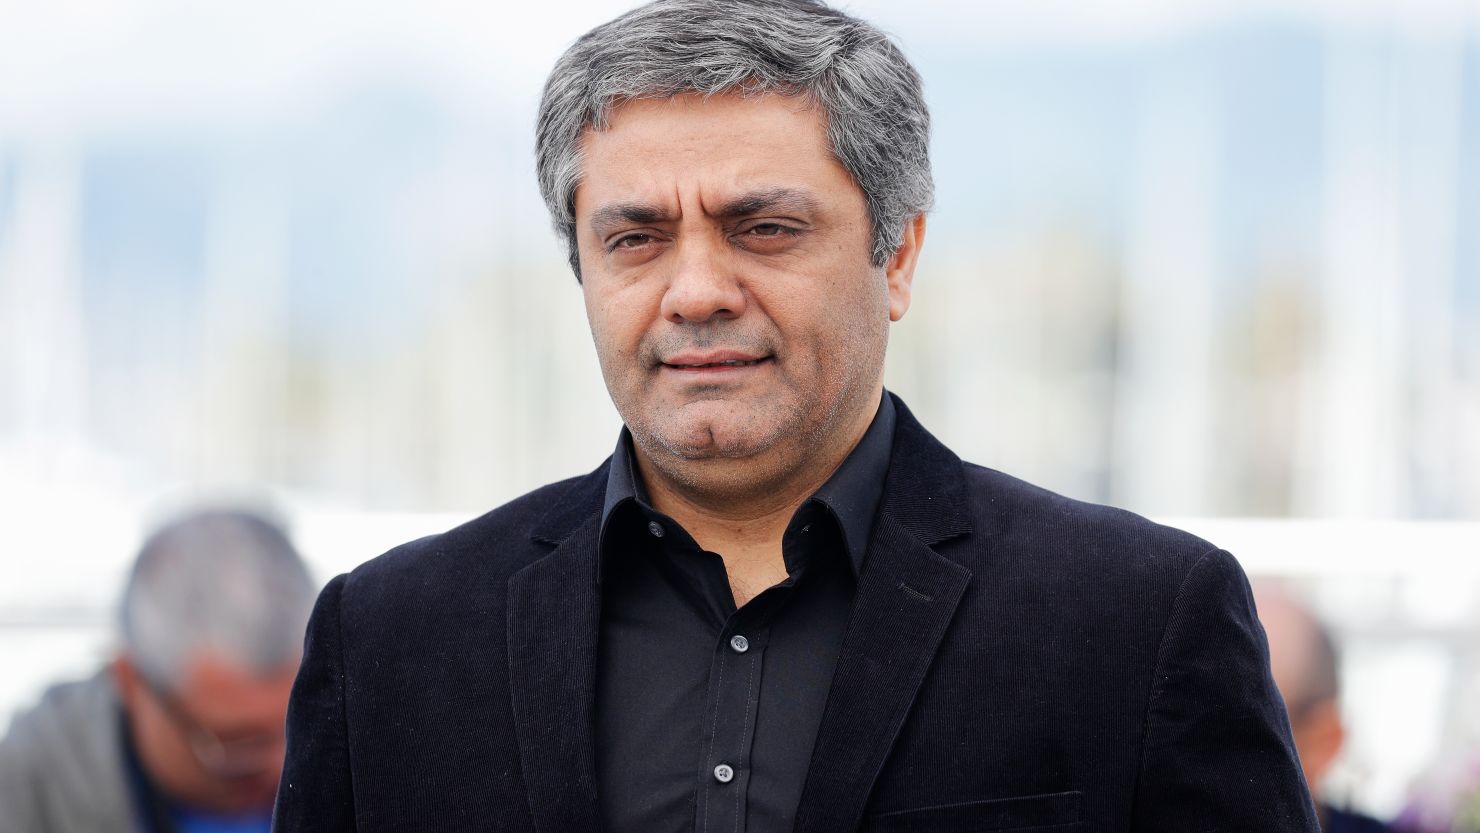 Mohammad Rasoulof at the Cannes Film Festival on May 19, 2017.